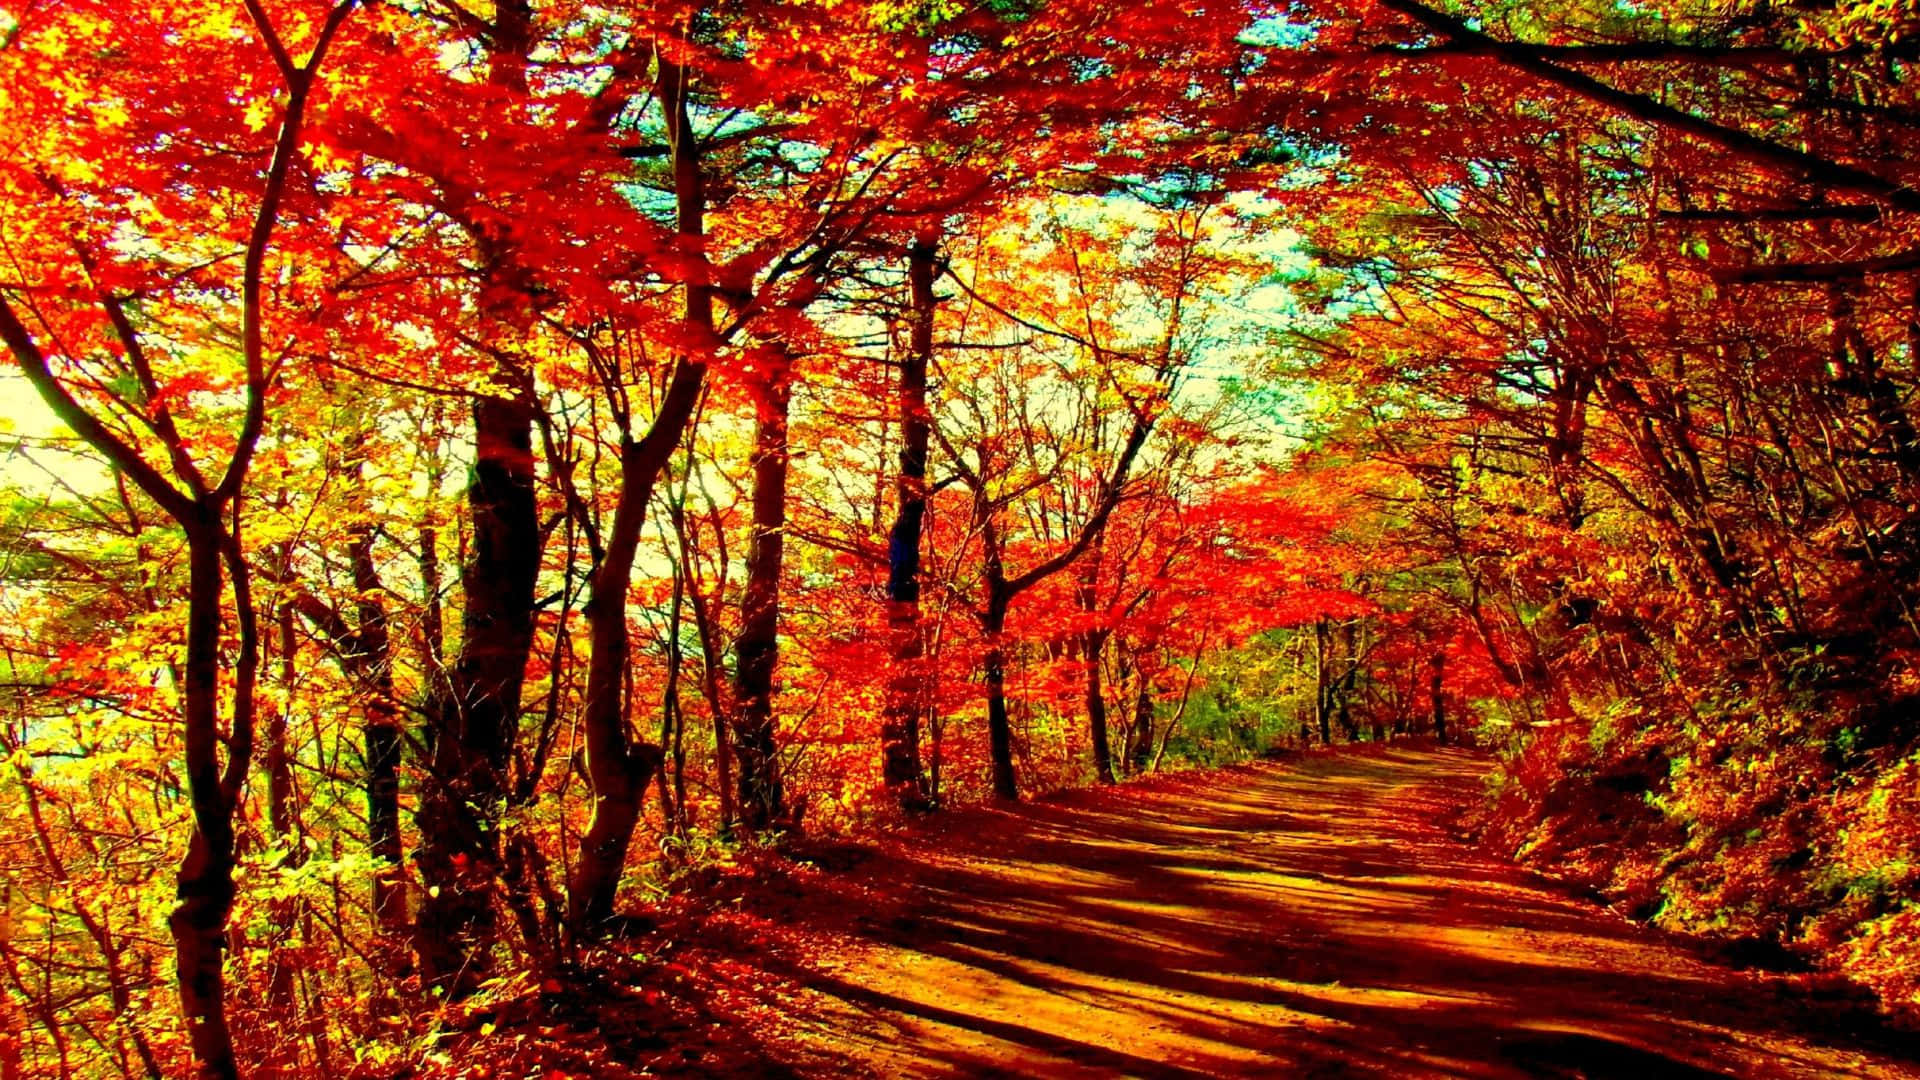 Enchanting fall forest with vibrant colors and sunlight streaming through trees Wallpaper